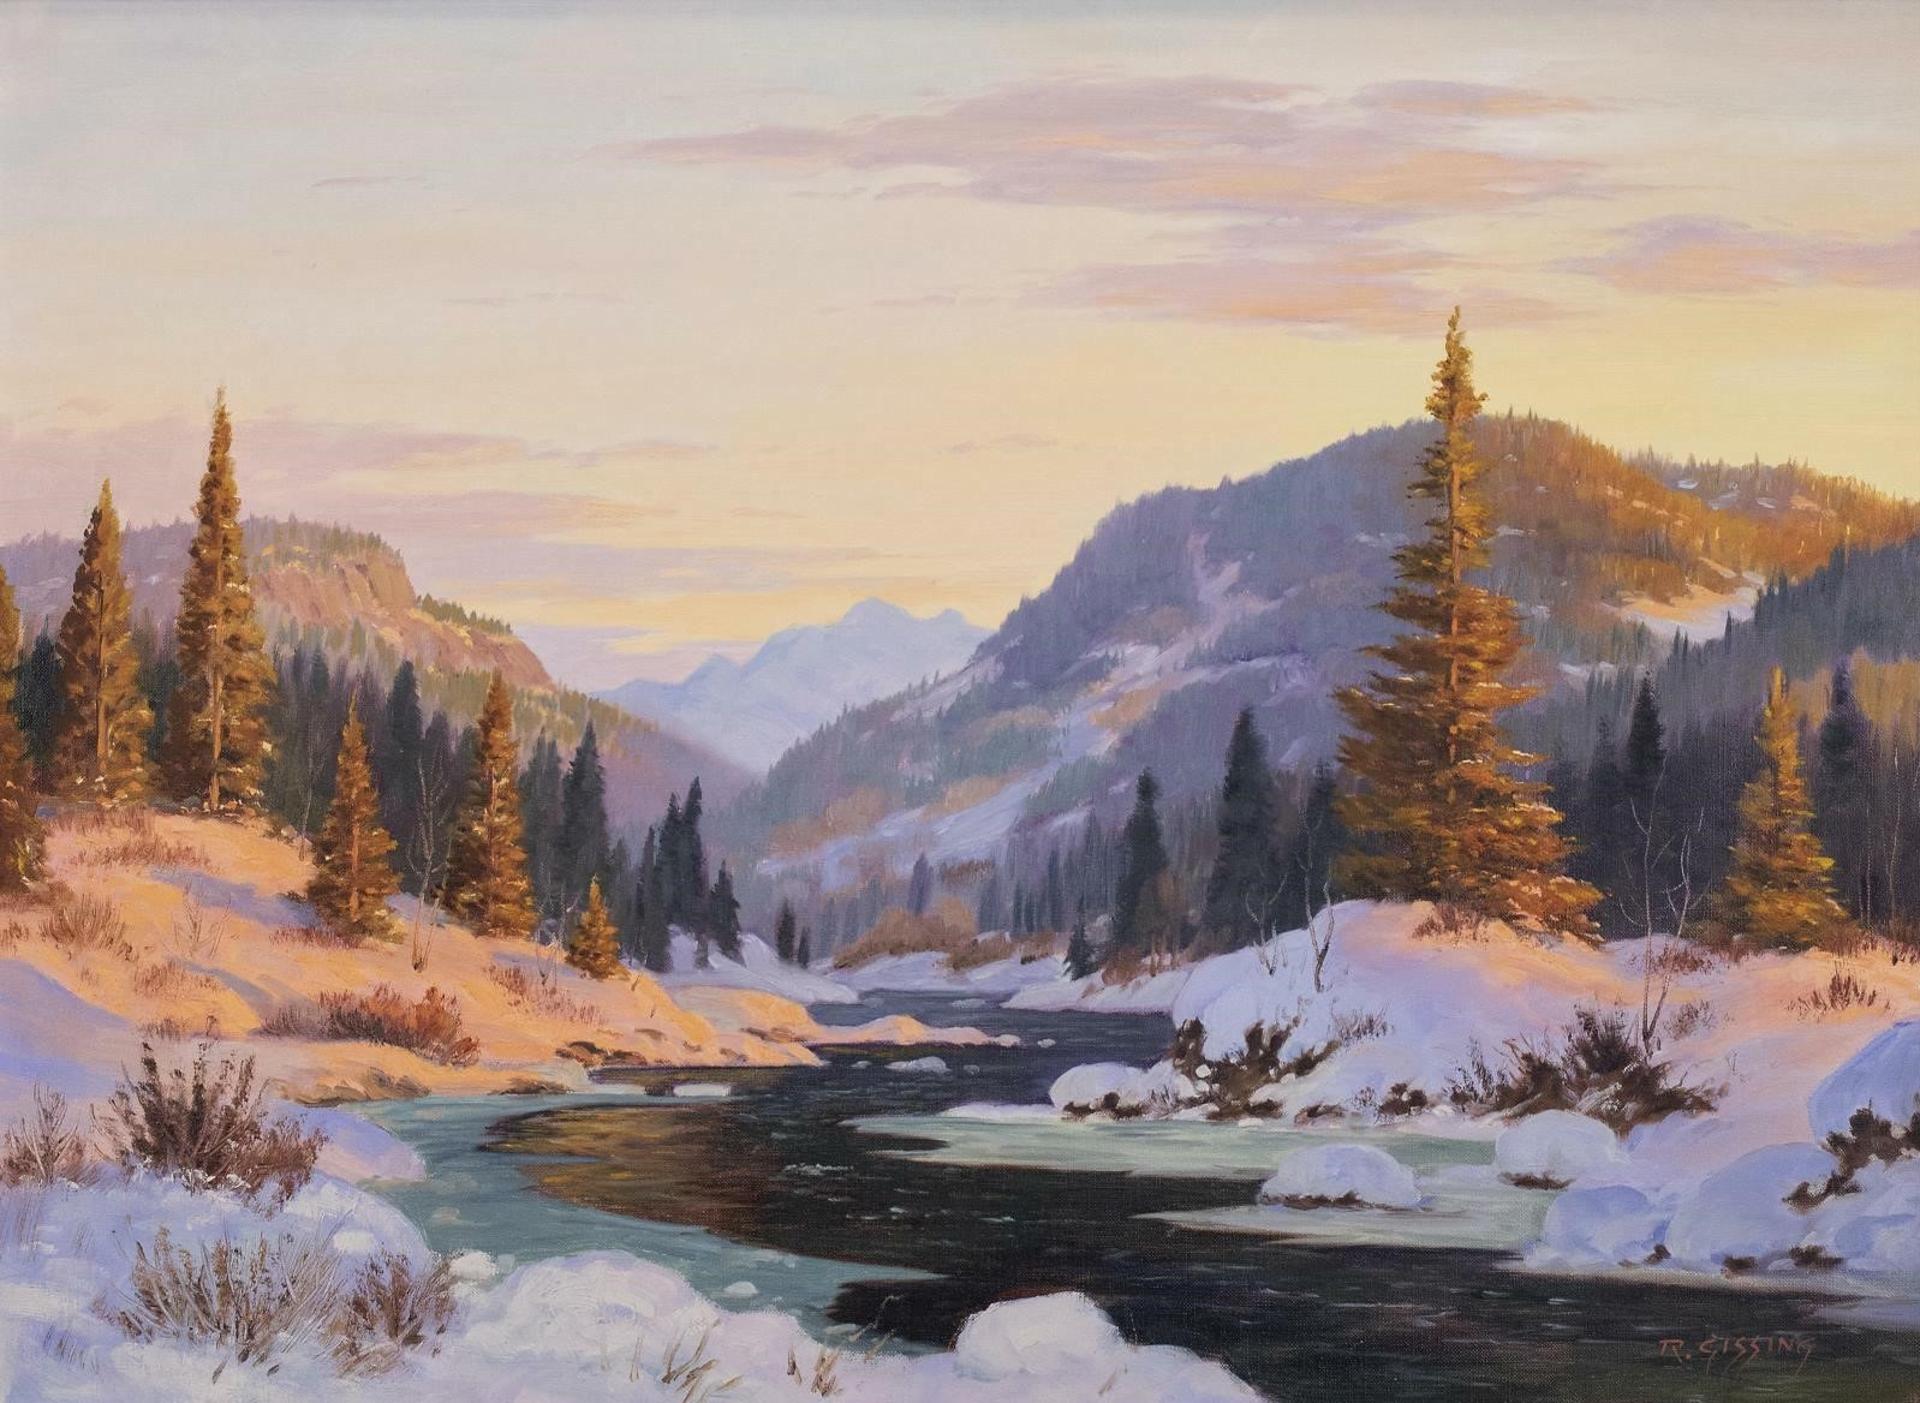 Roland Gissing (1895-1967) - Winter Glow